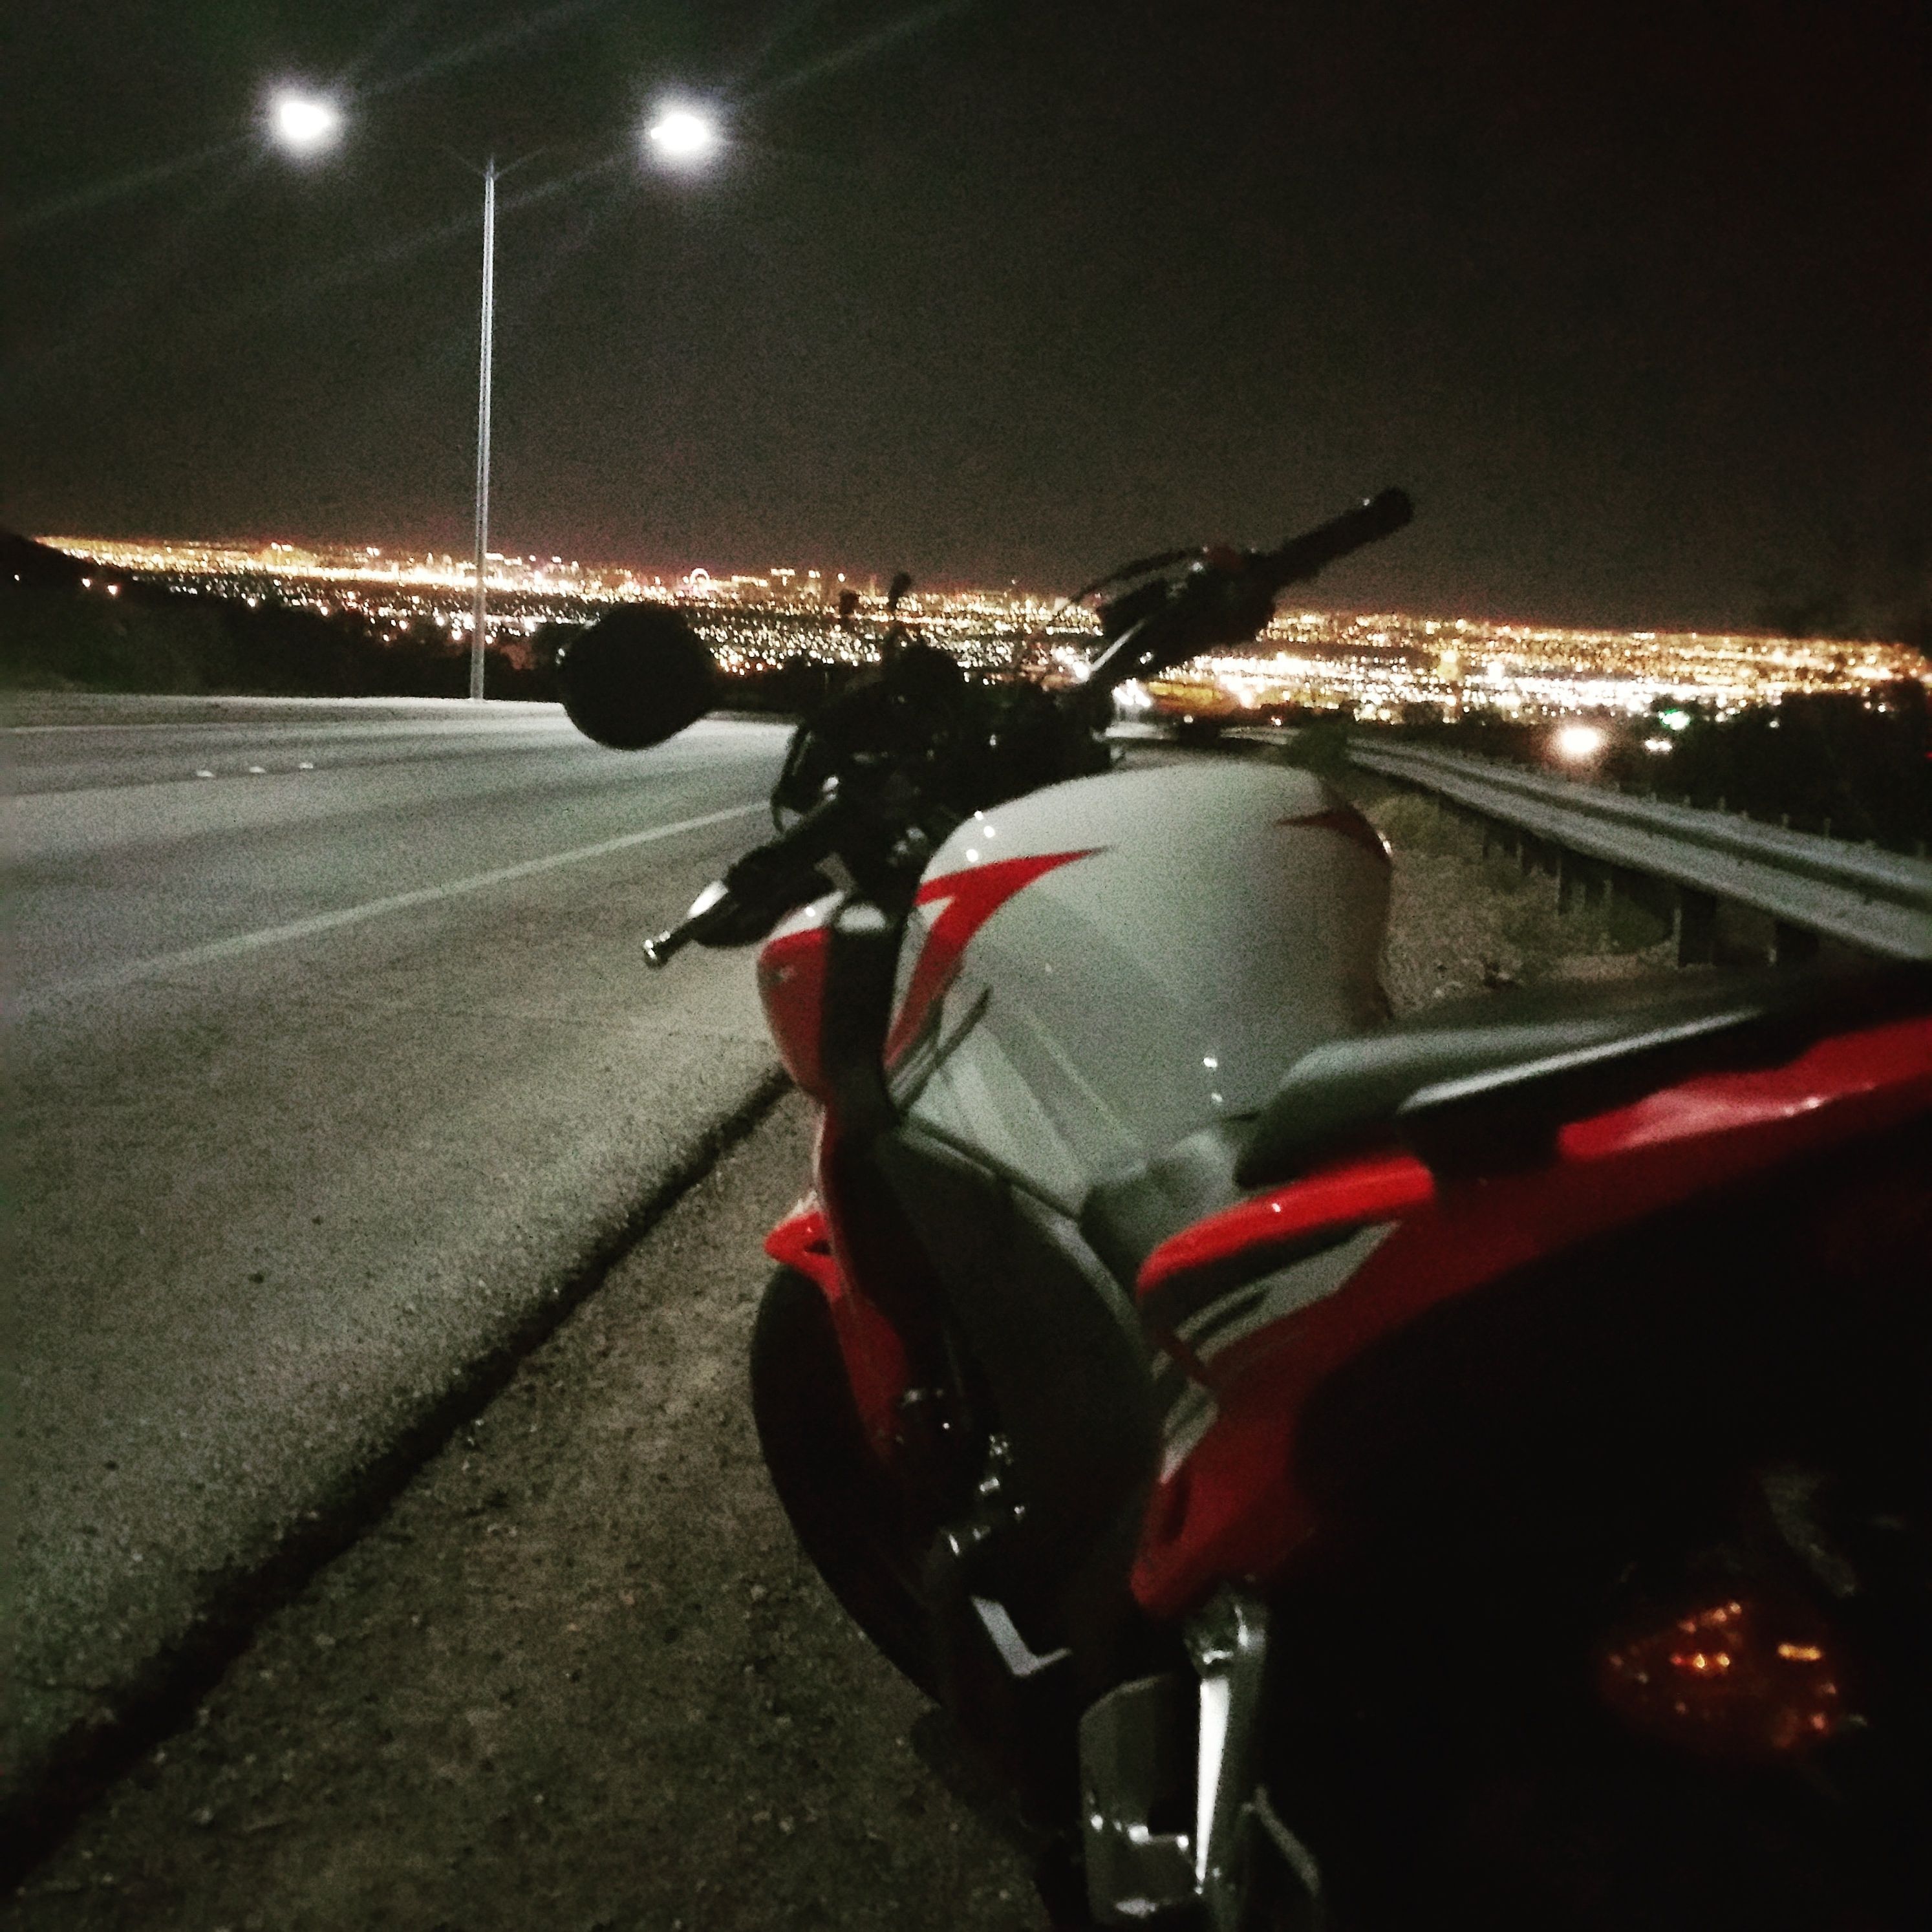 Vegas in the background